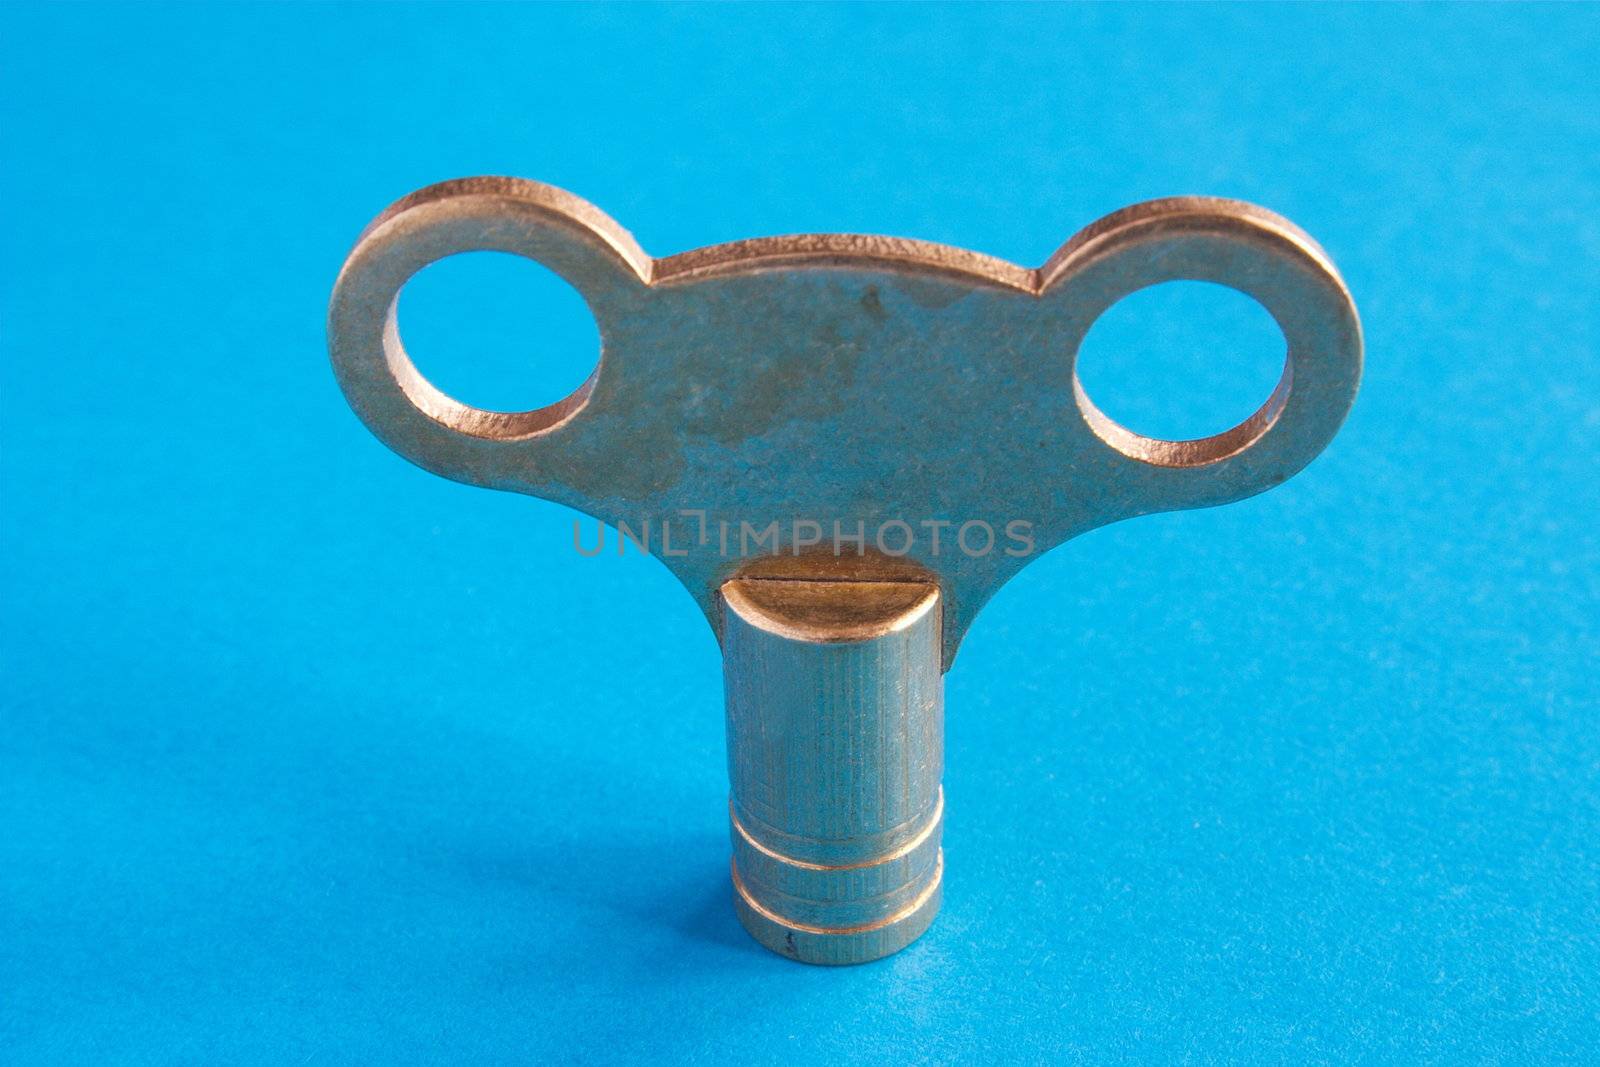 macro shot of a metal radiator key over a blue background